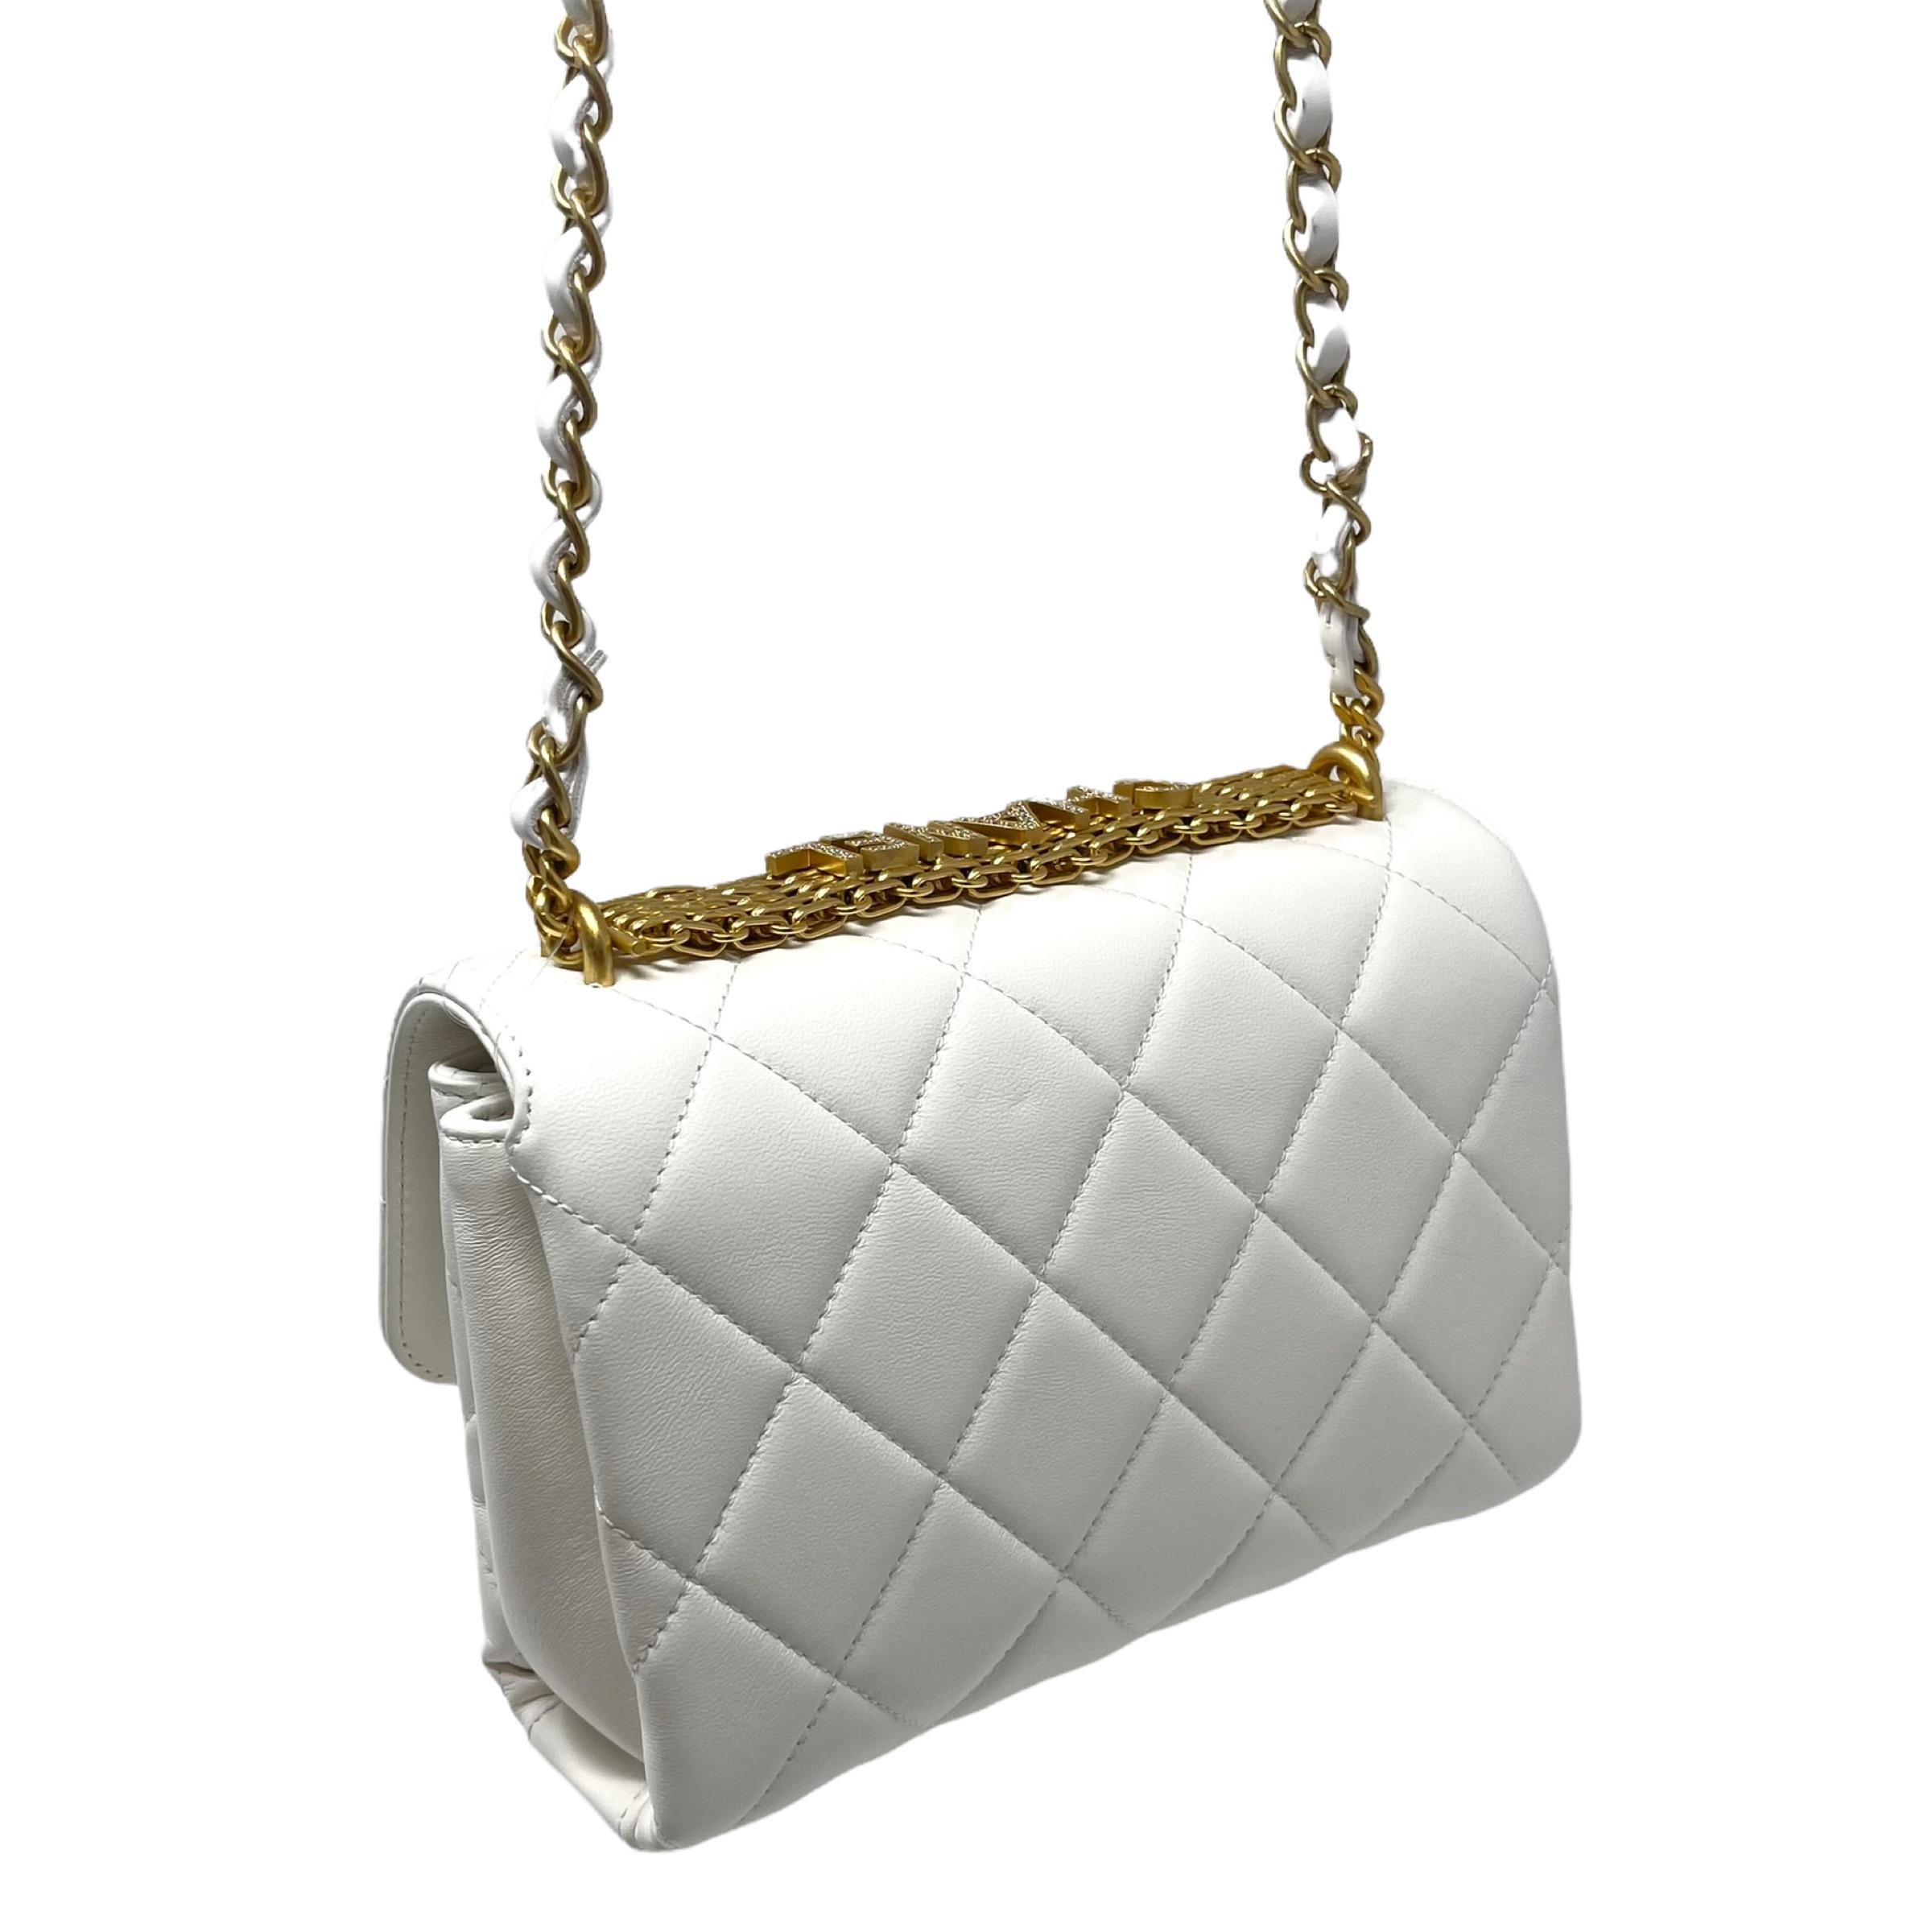 NEW Chanel White Small Flap Bag Quilted Leather Crossbody Bag For Sale 7